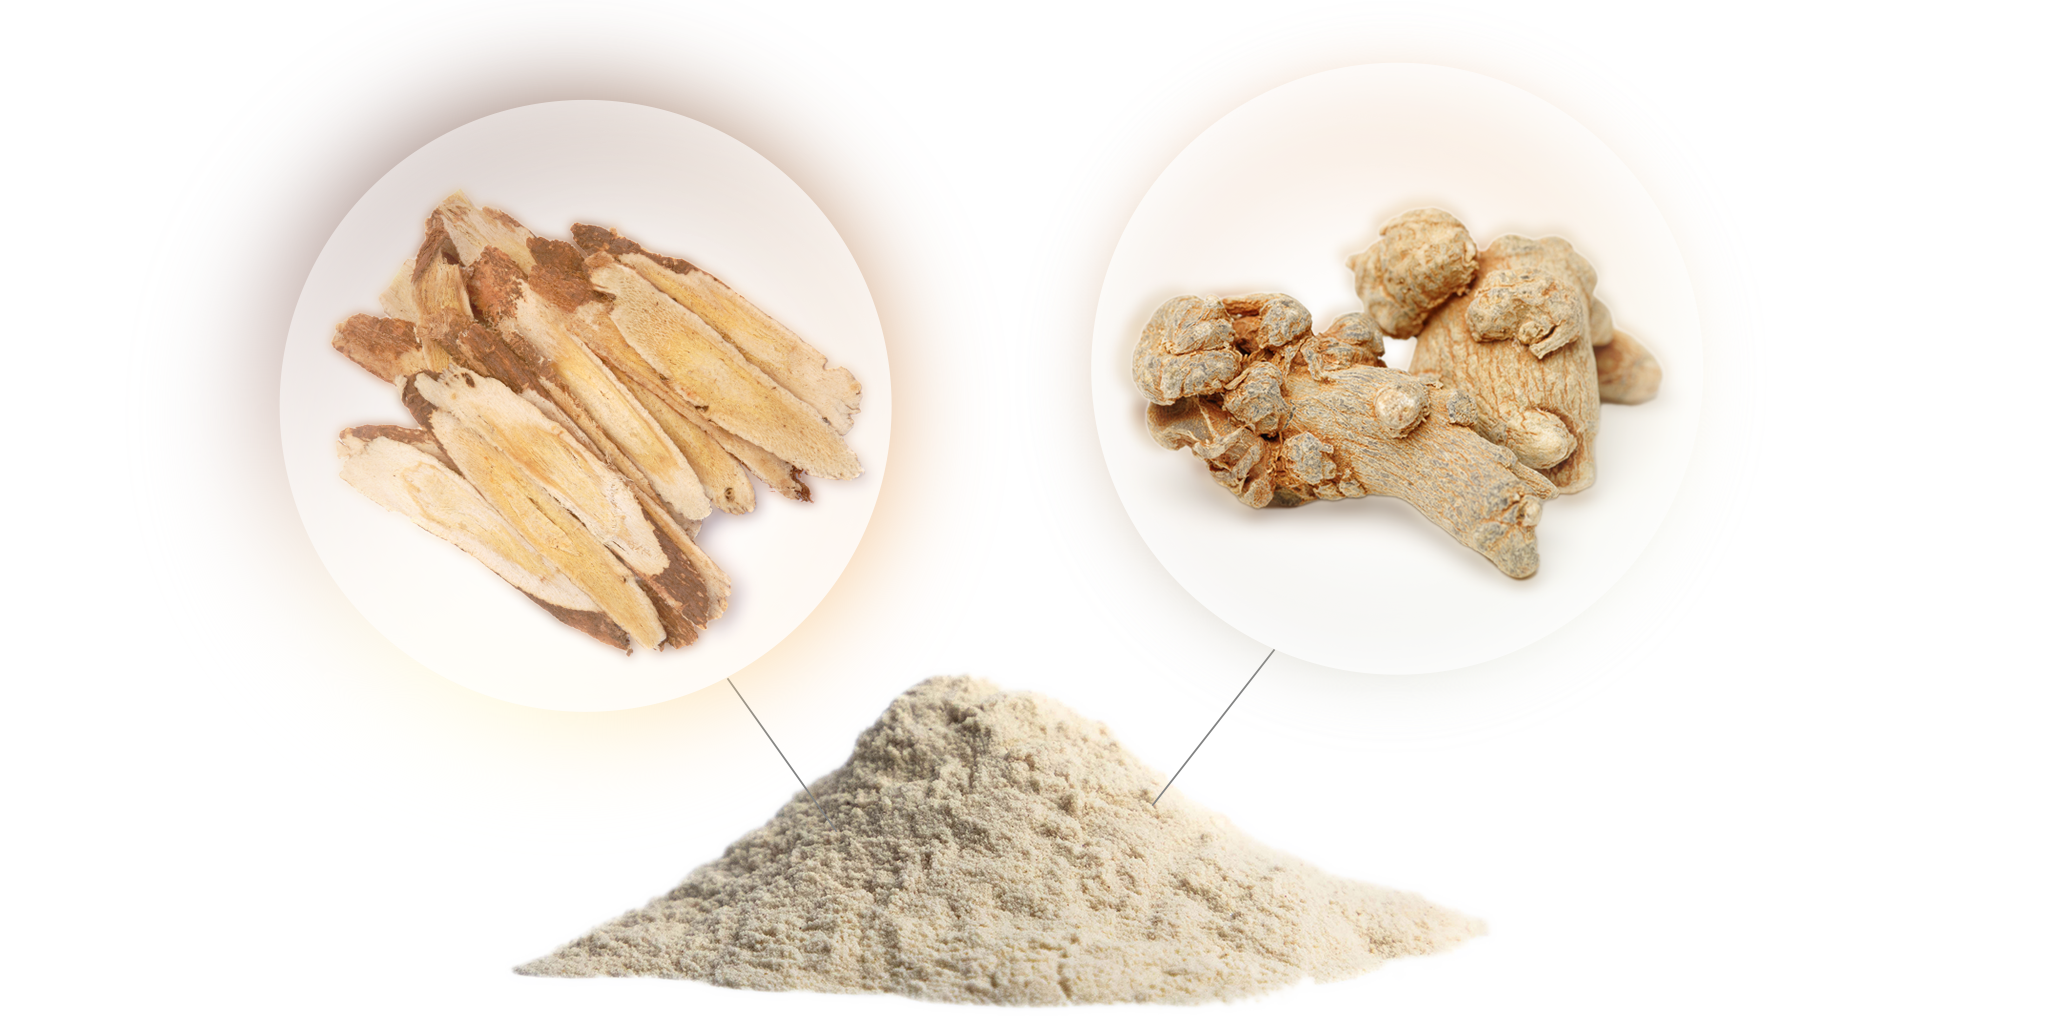 AstraGin® composition: Astragalus membranaceus root and Panax notoginseng root